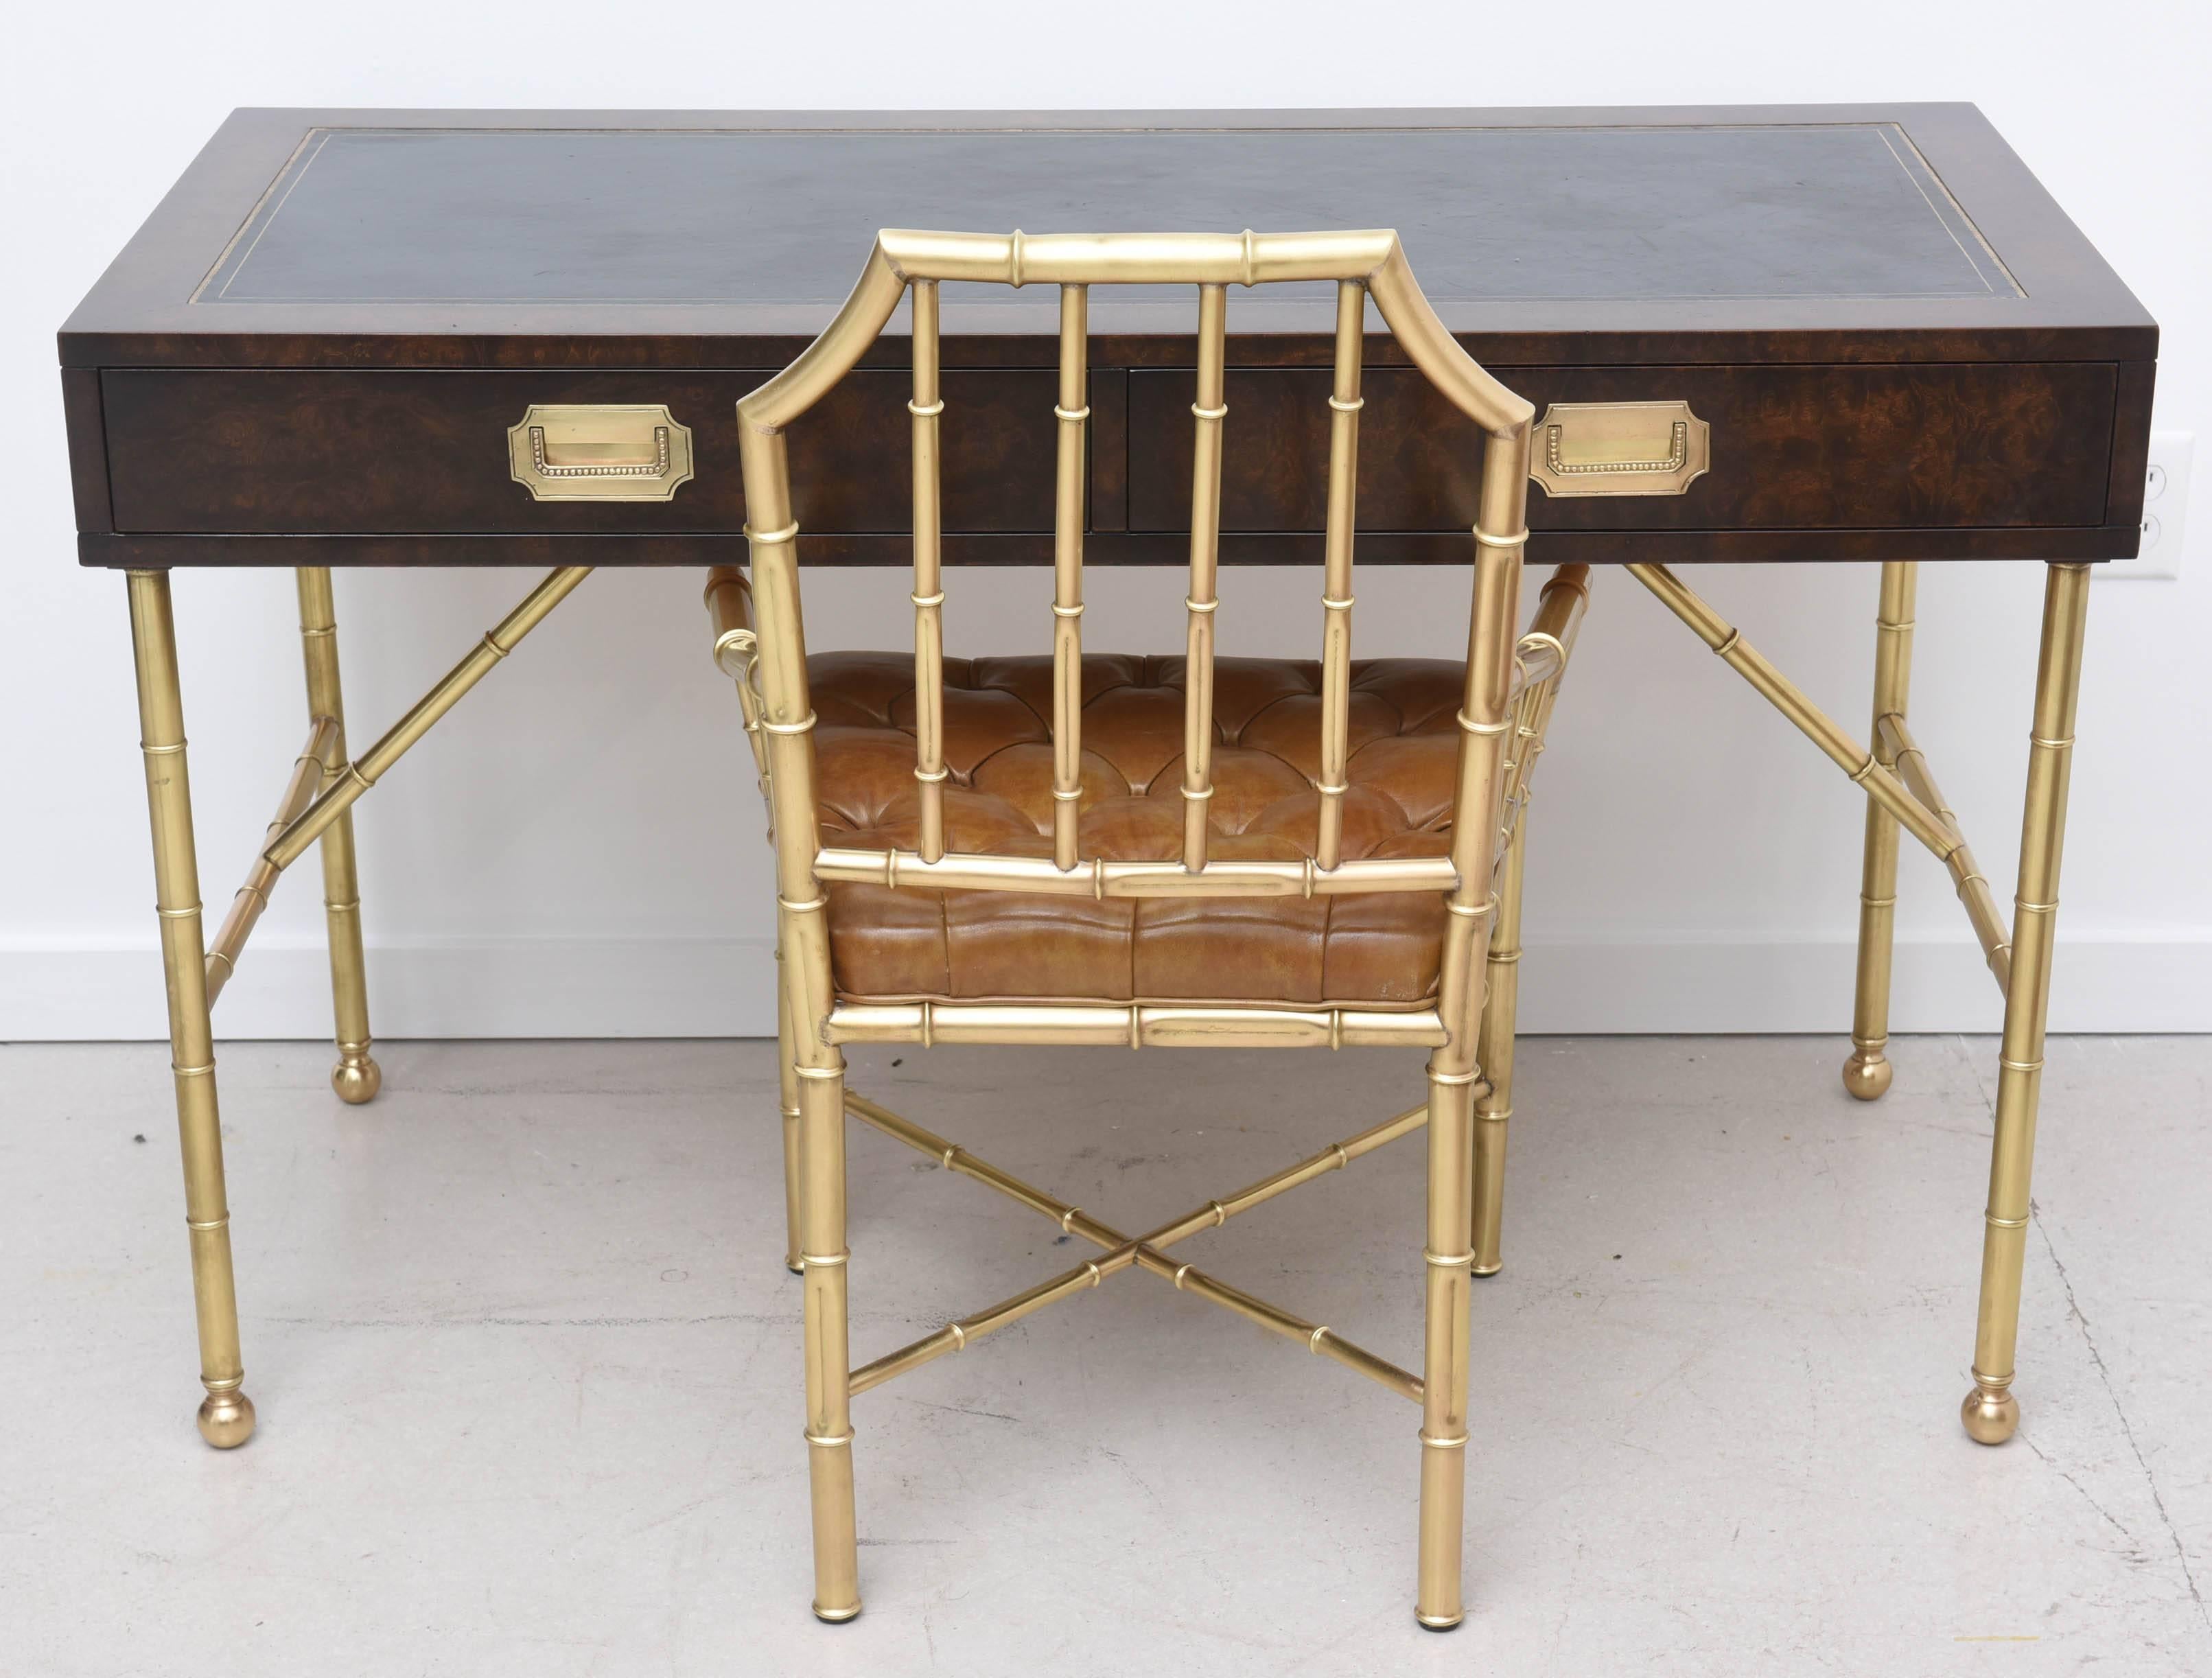 Vintage Mastercraft desk with brass base. The base has a bamboo motif and the top is leather. The coordinating chair is Chippendale style, also with faux bamboo motif. 
Desk measures:
30